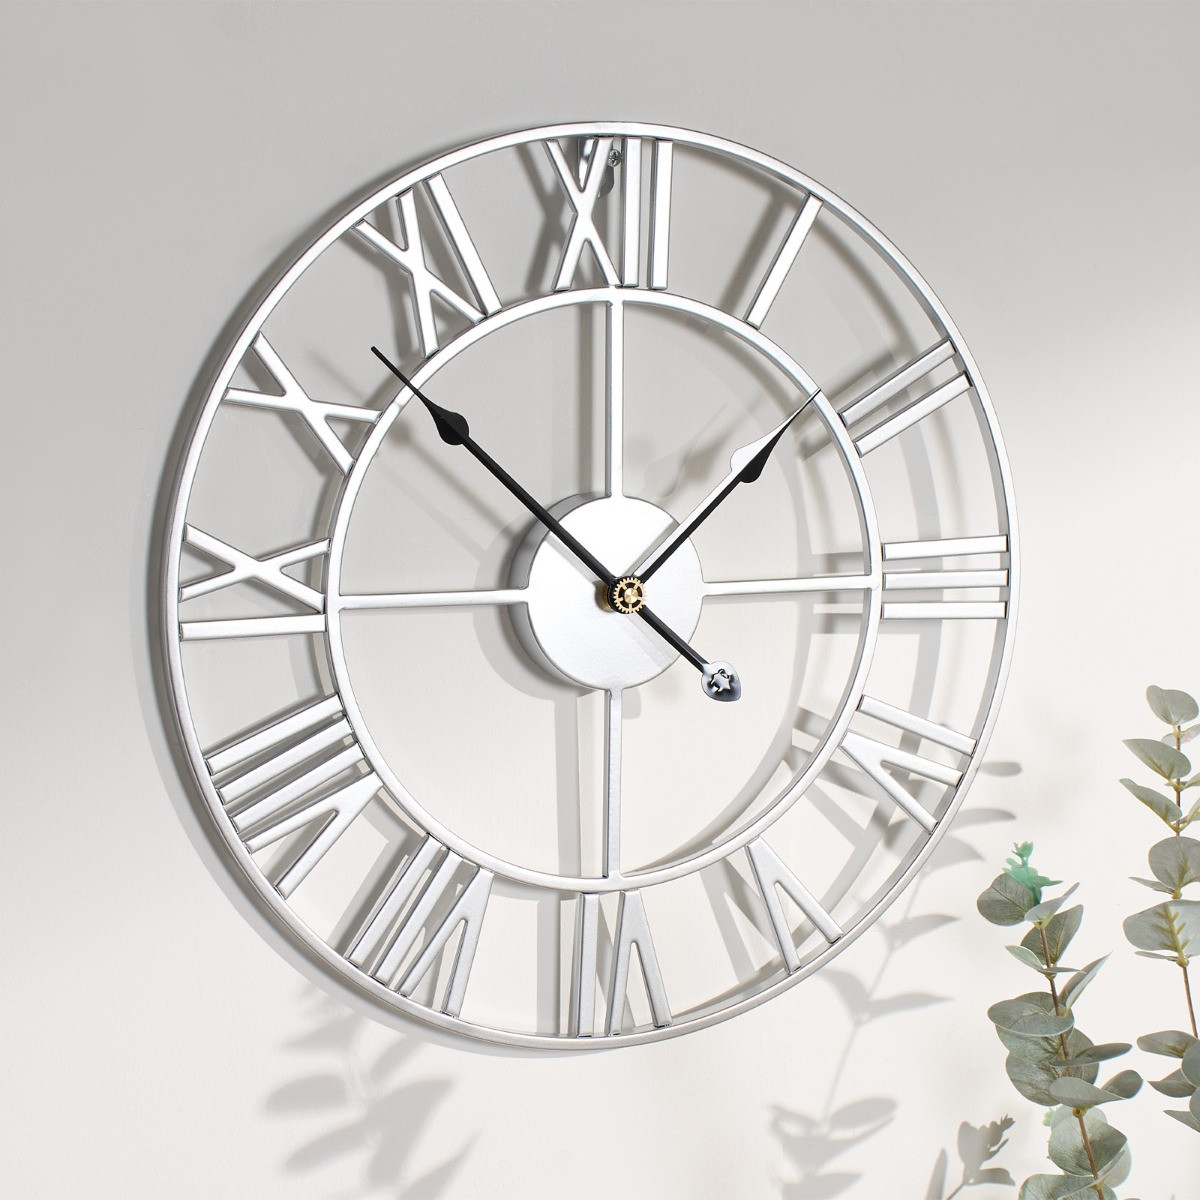 OHS Skeleton Wall Clock - Silver>